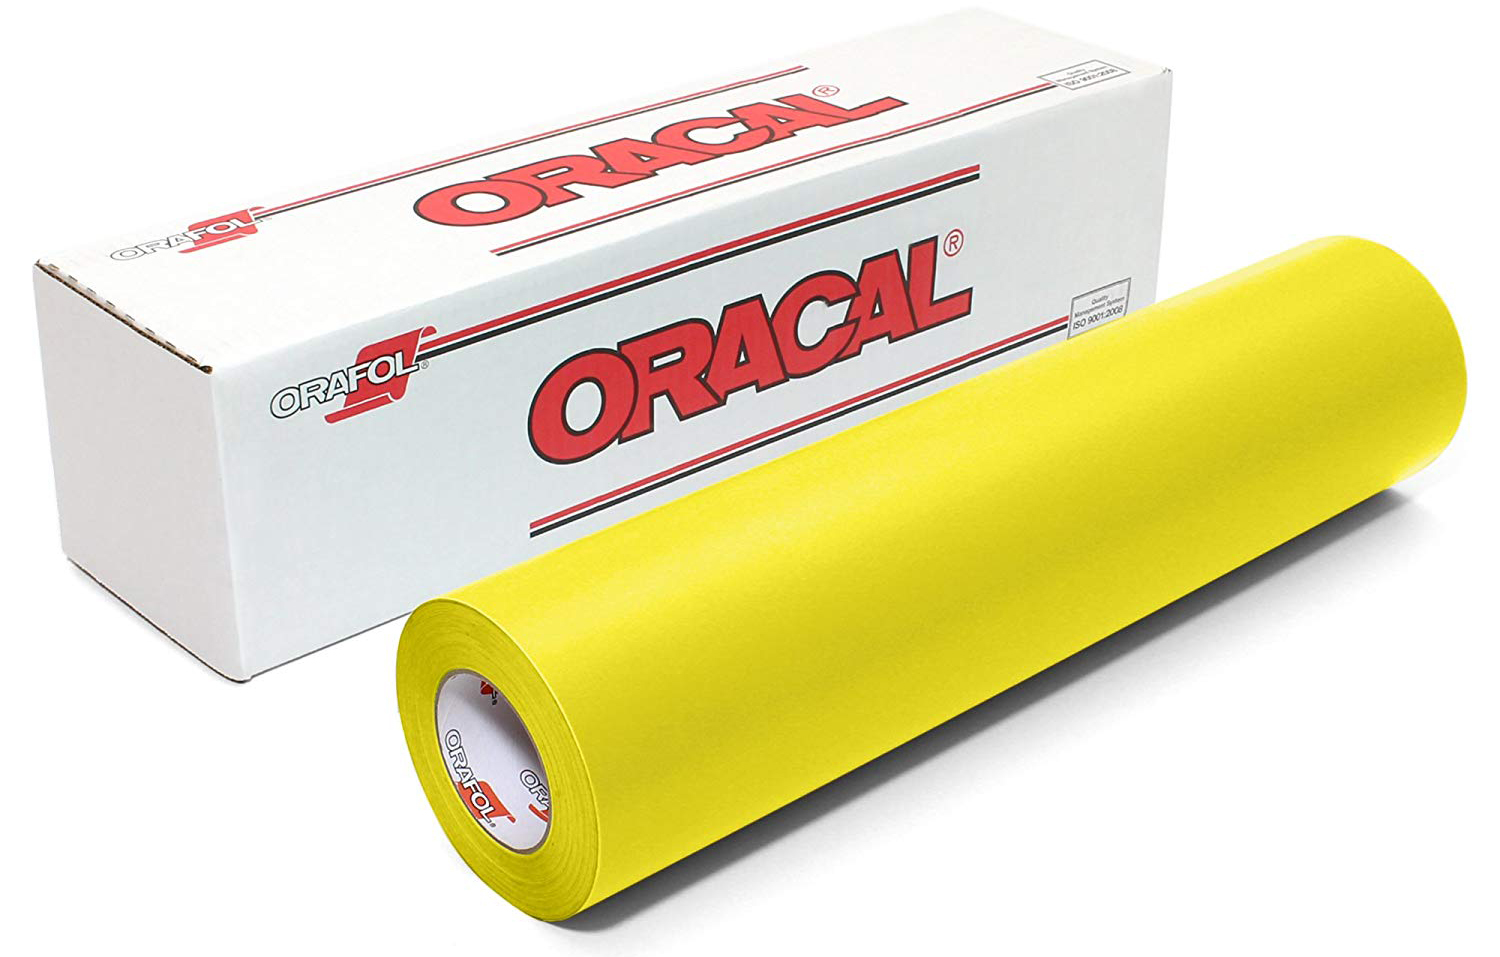 24IN BRIMSTONE YELLOW 631 EXHIBITION CAL - Oracal 631 Exhibition Calendered PVC Film